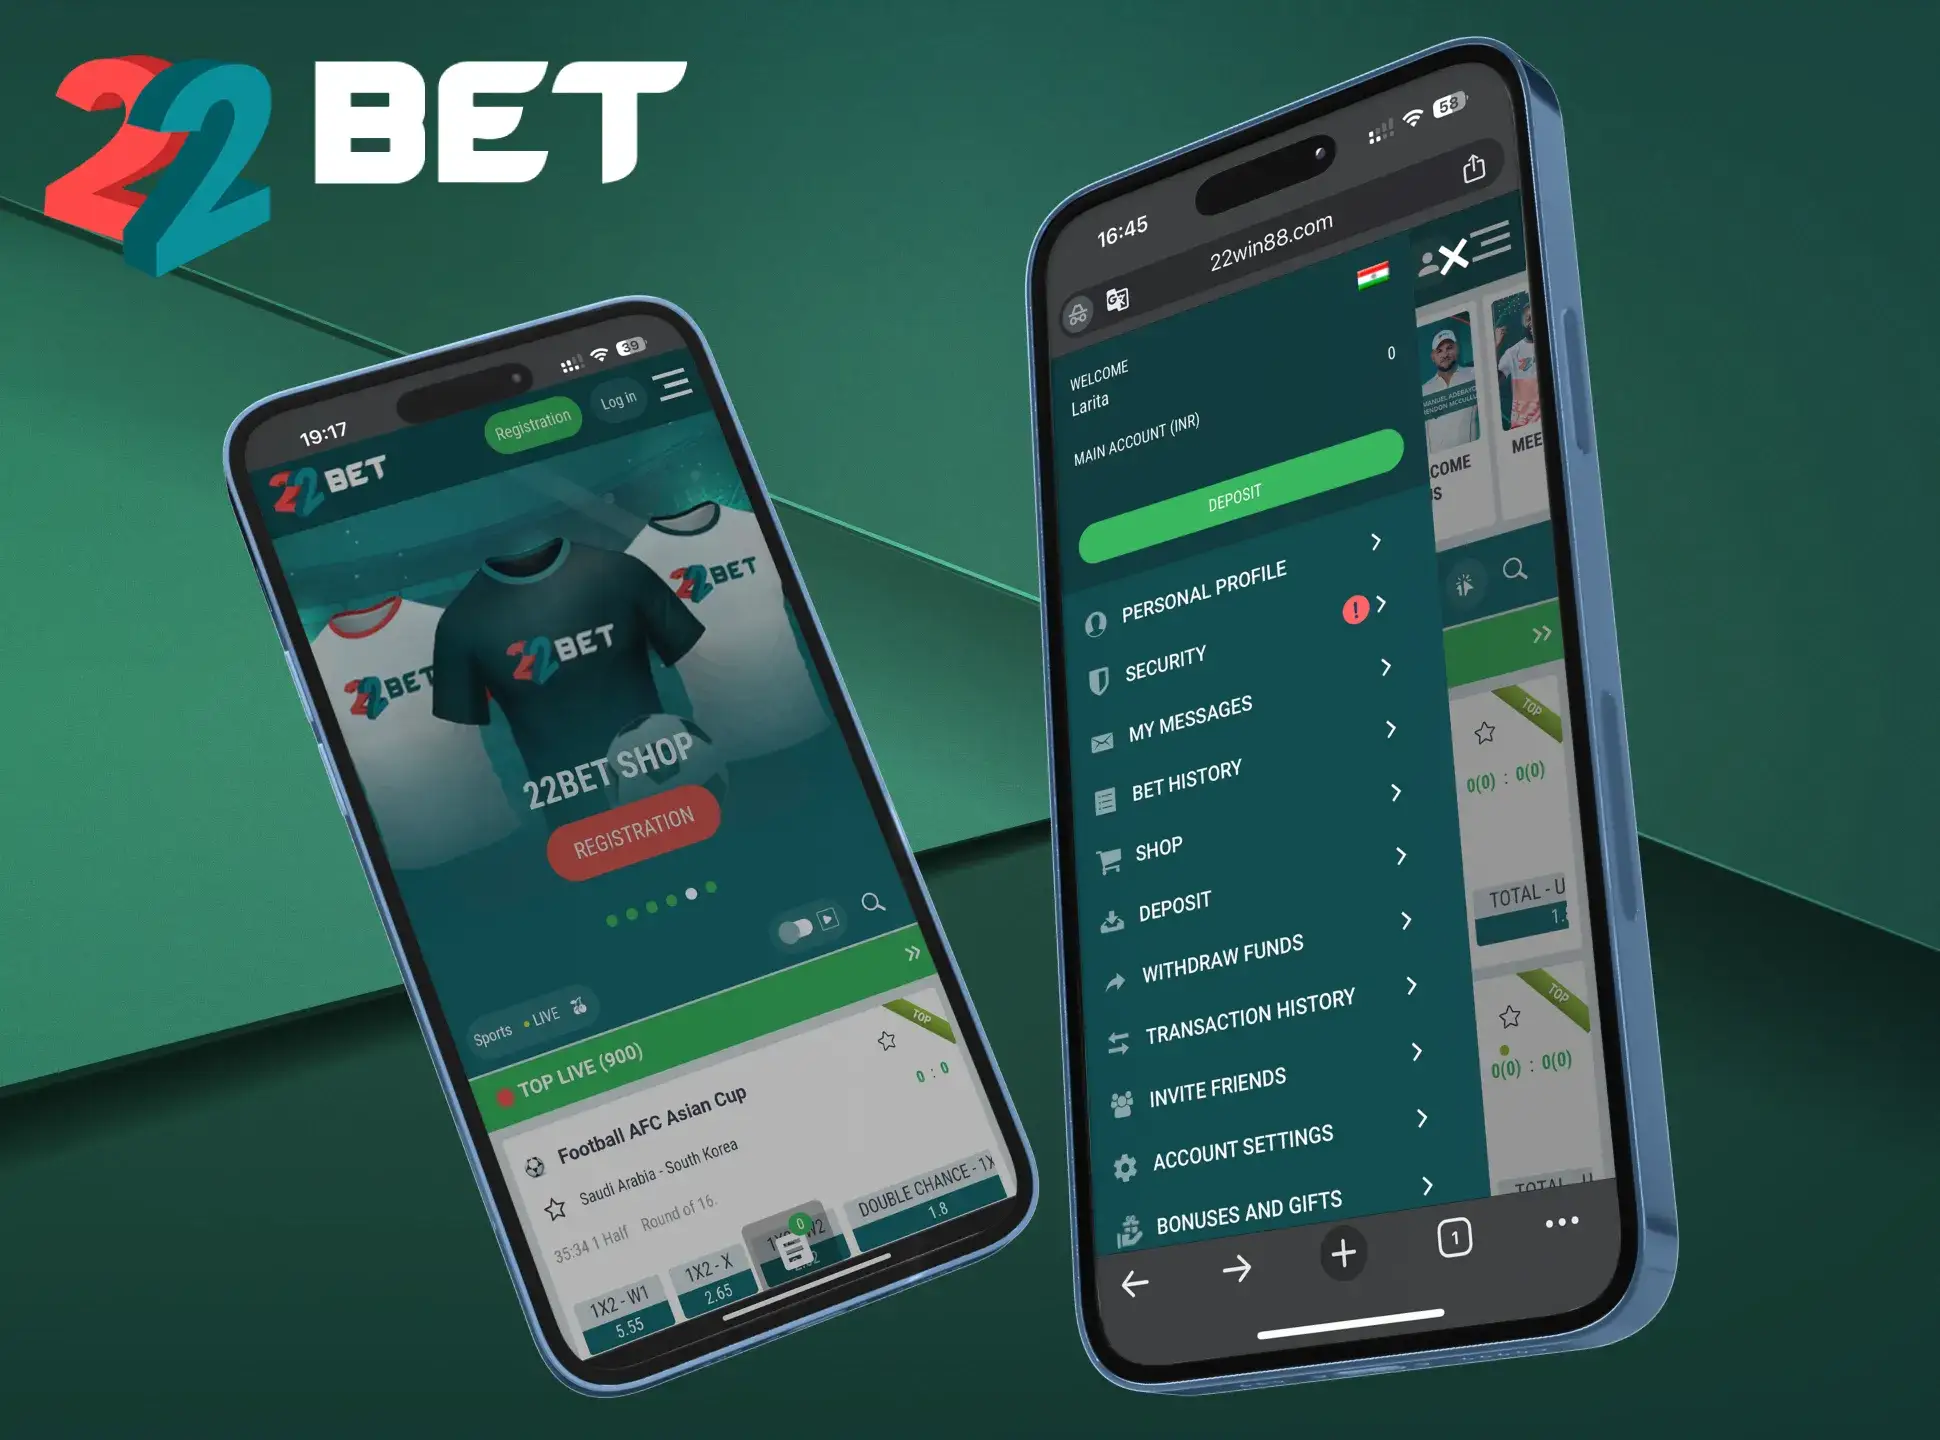 The mobile version of 22Bet is convenient and available for iOS users.